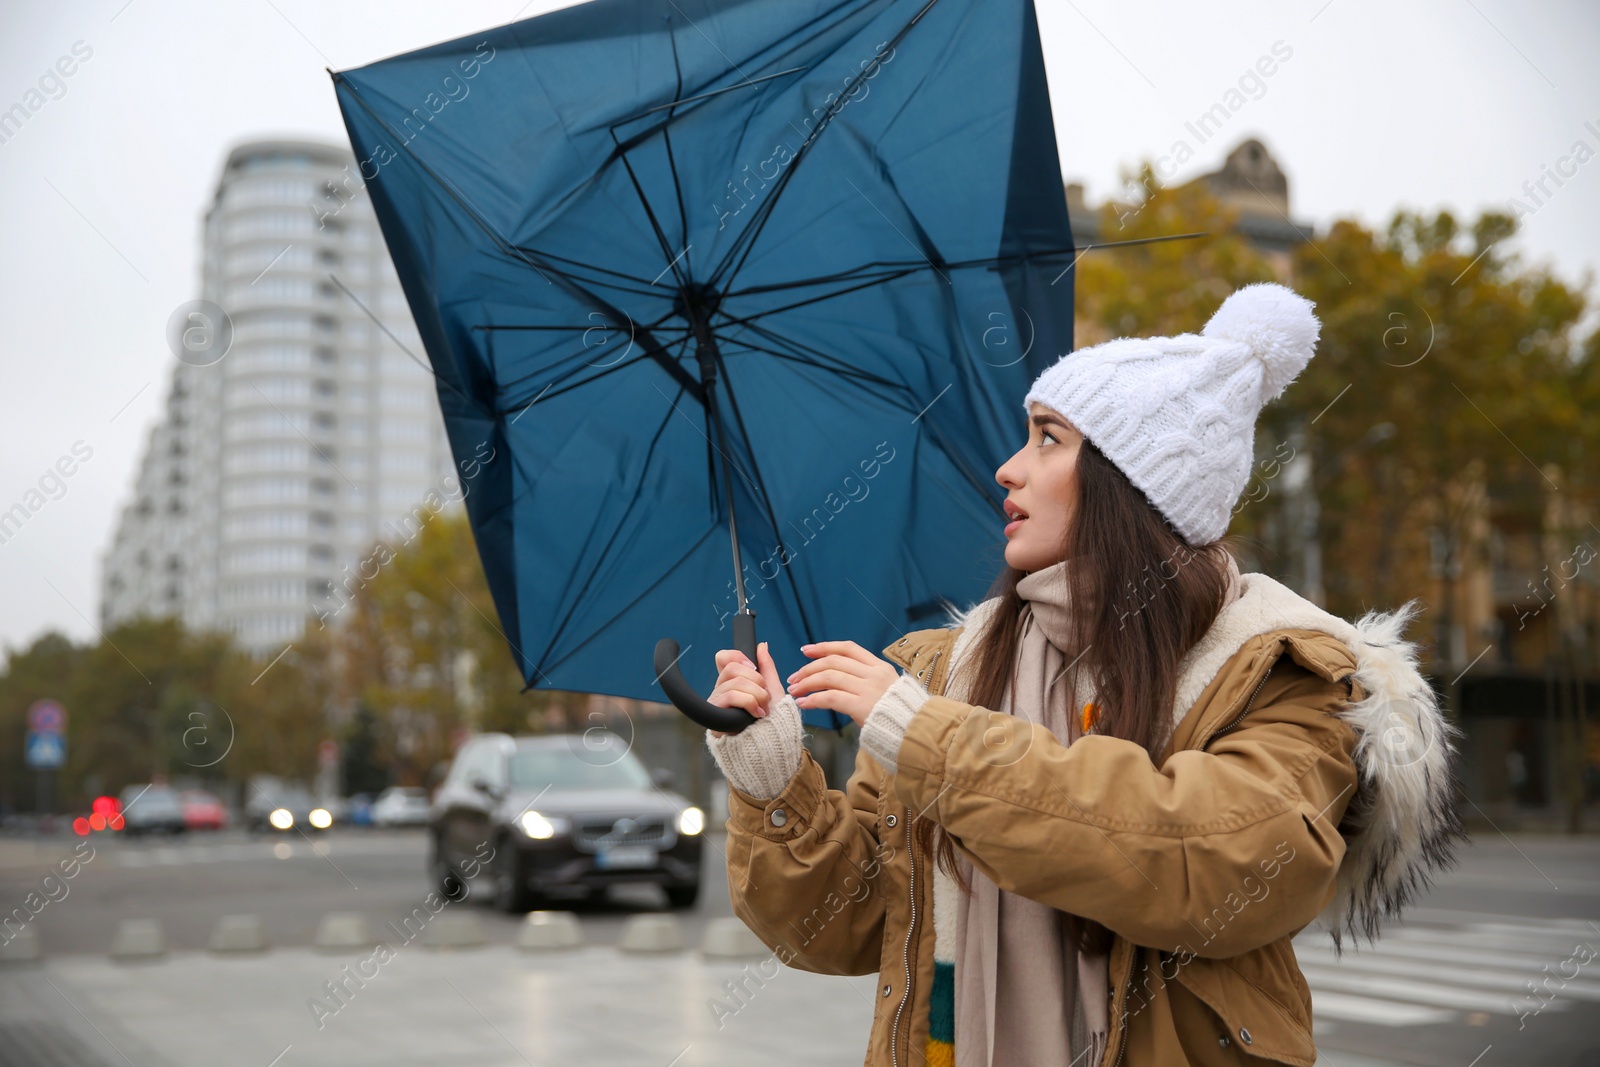 Photo of Woman with blue umbrella caught in gust of wind on street